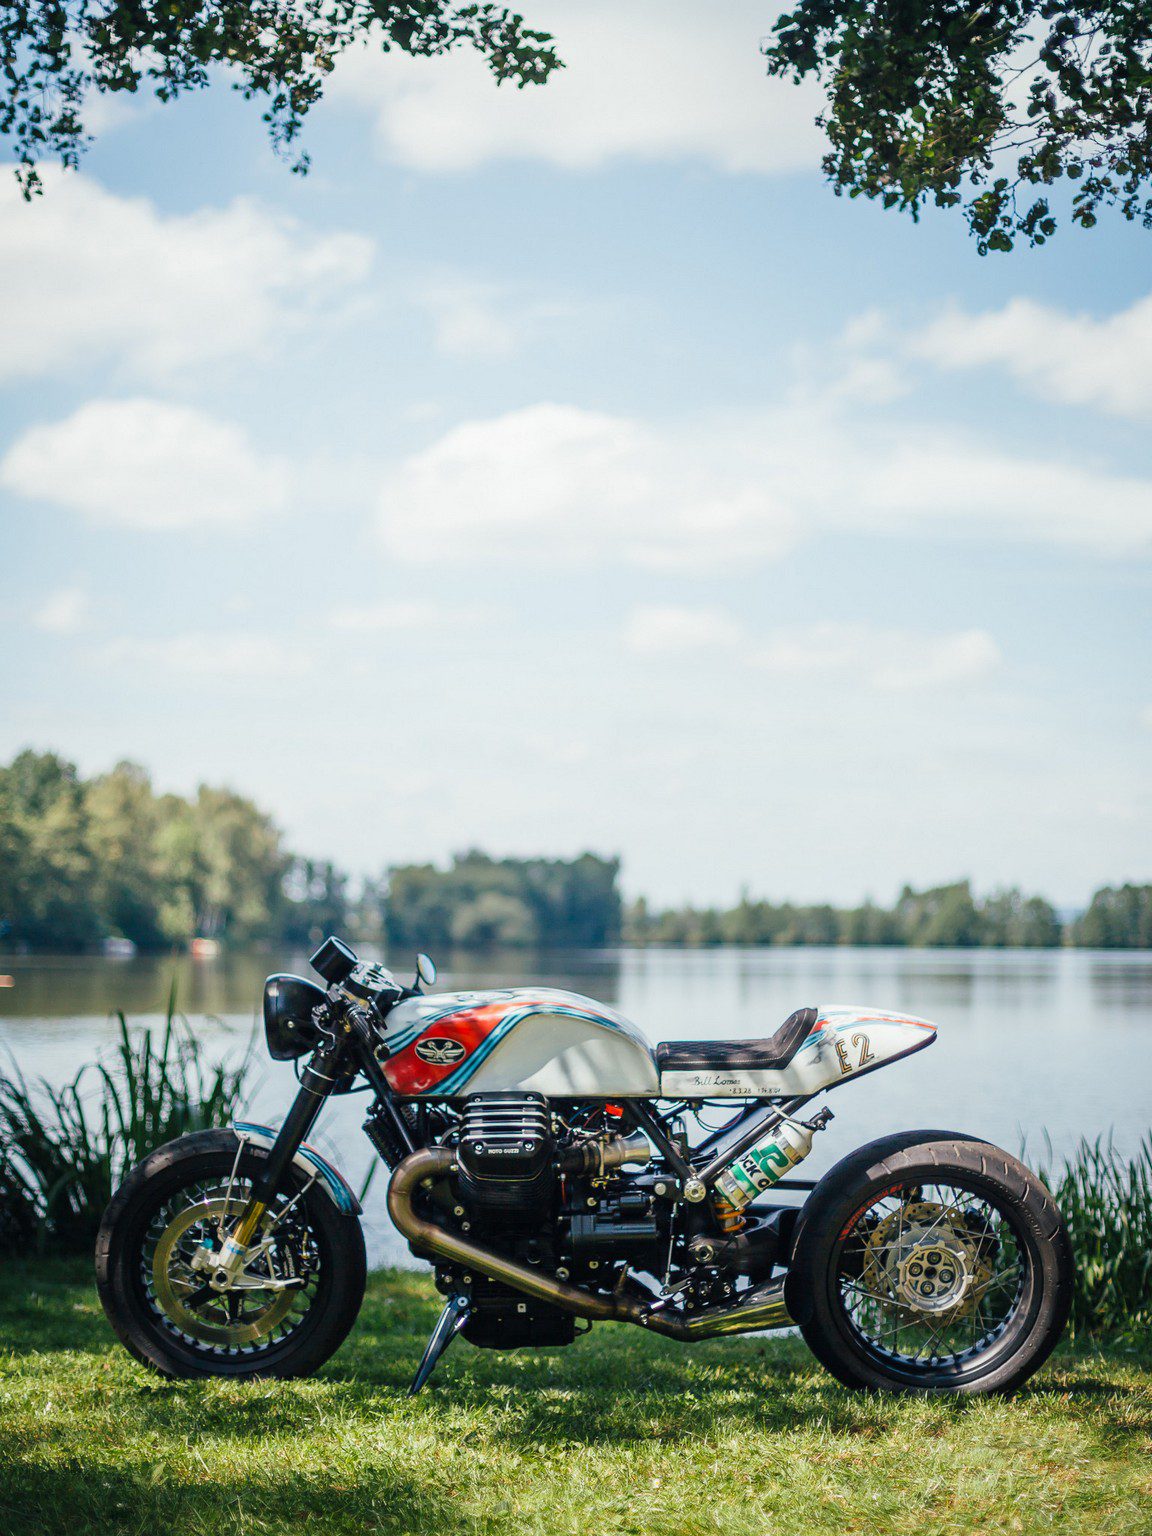 Moto Guzzi Motorcycle by a lake in Europe